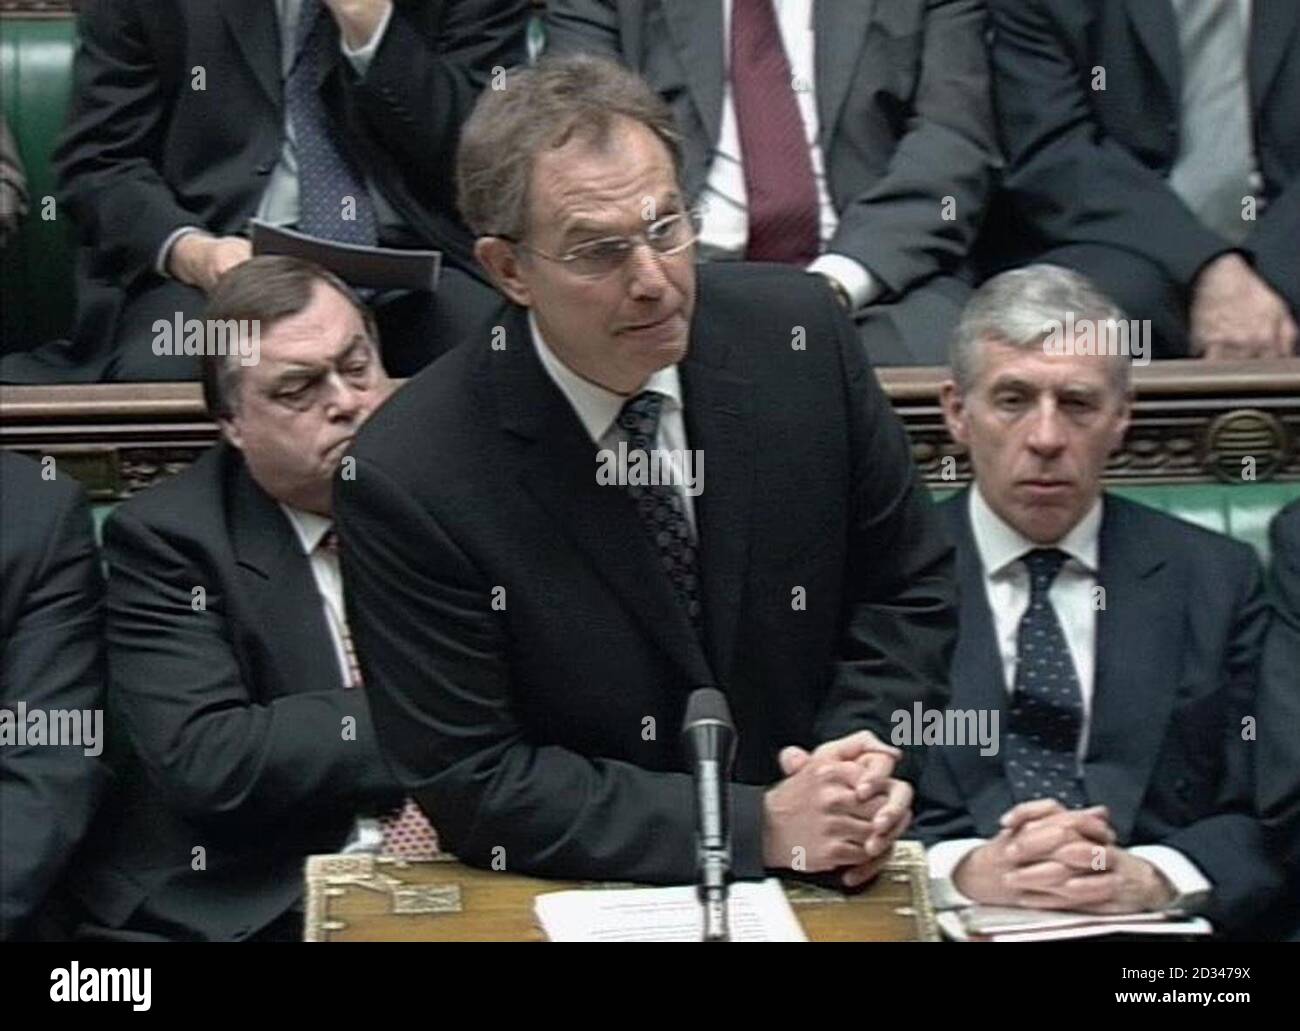 Videograb of Britain's Prime Minister Tony Blair as he issues a statement to the House of Commons updating MPs on the growing number of British deaths following the Asian tsunami disaster, Monday January 10, 2005. Mr Blair has also defended the Government's handling of the disaster, after he came under fire for not cutting short his holiday to deal with the crisis. Ministers have also been accused of lagging behind the public mood. See PA story POLITICS Blair. PRESS ASSOCIATION Photo. Photo credit should read: PA Stock Photo